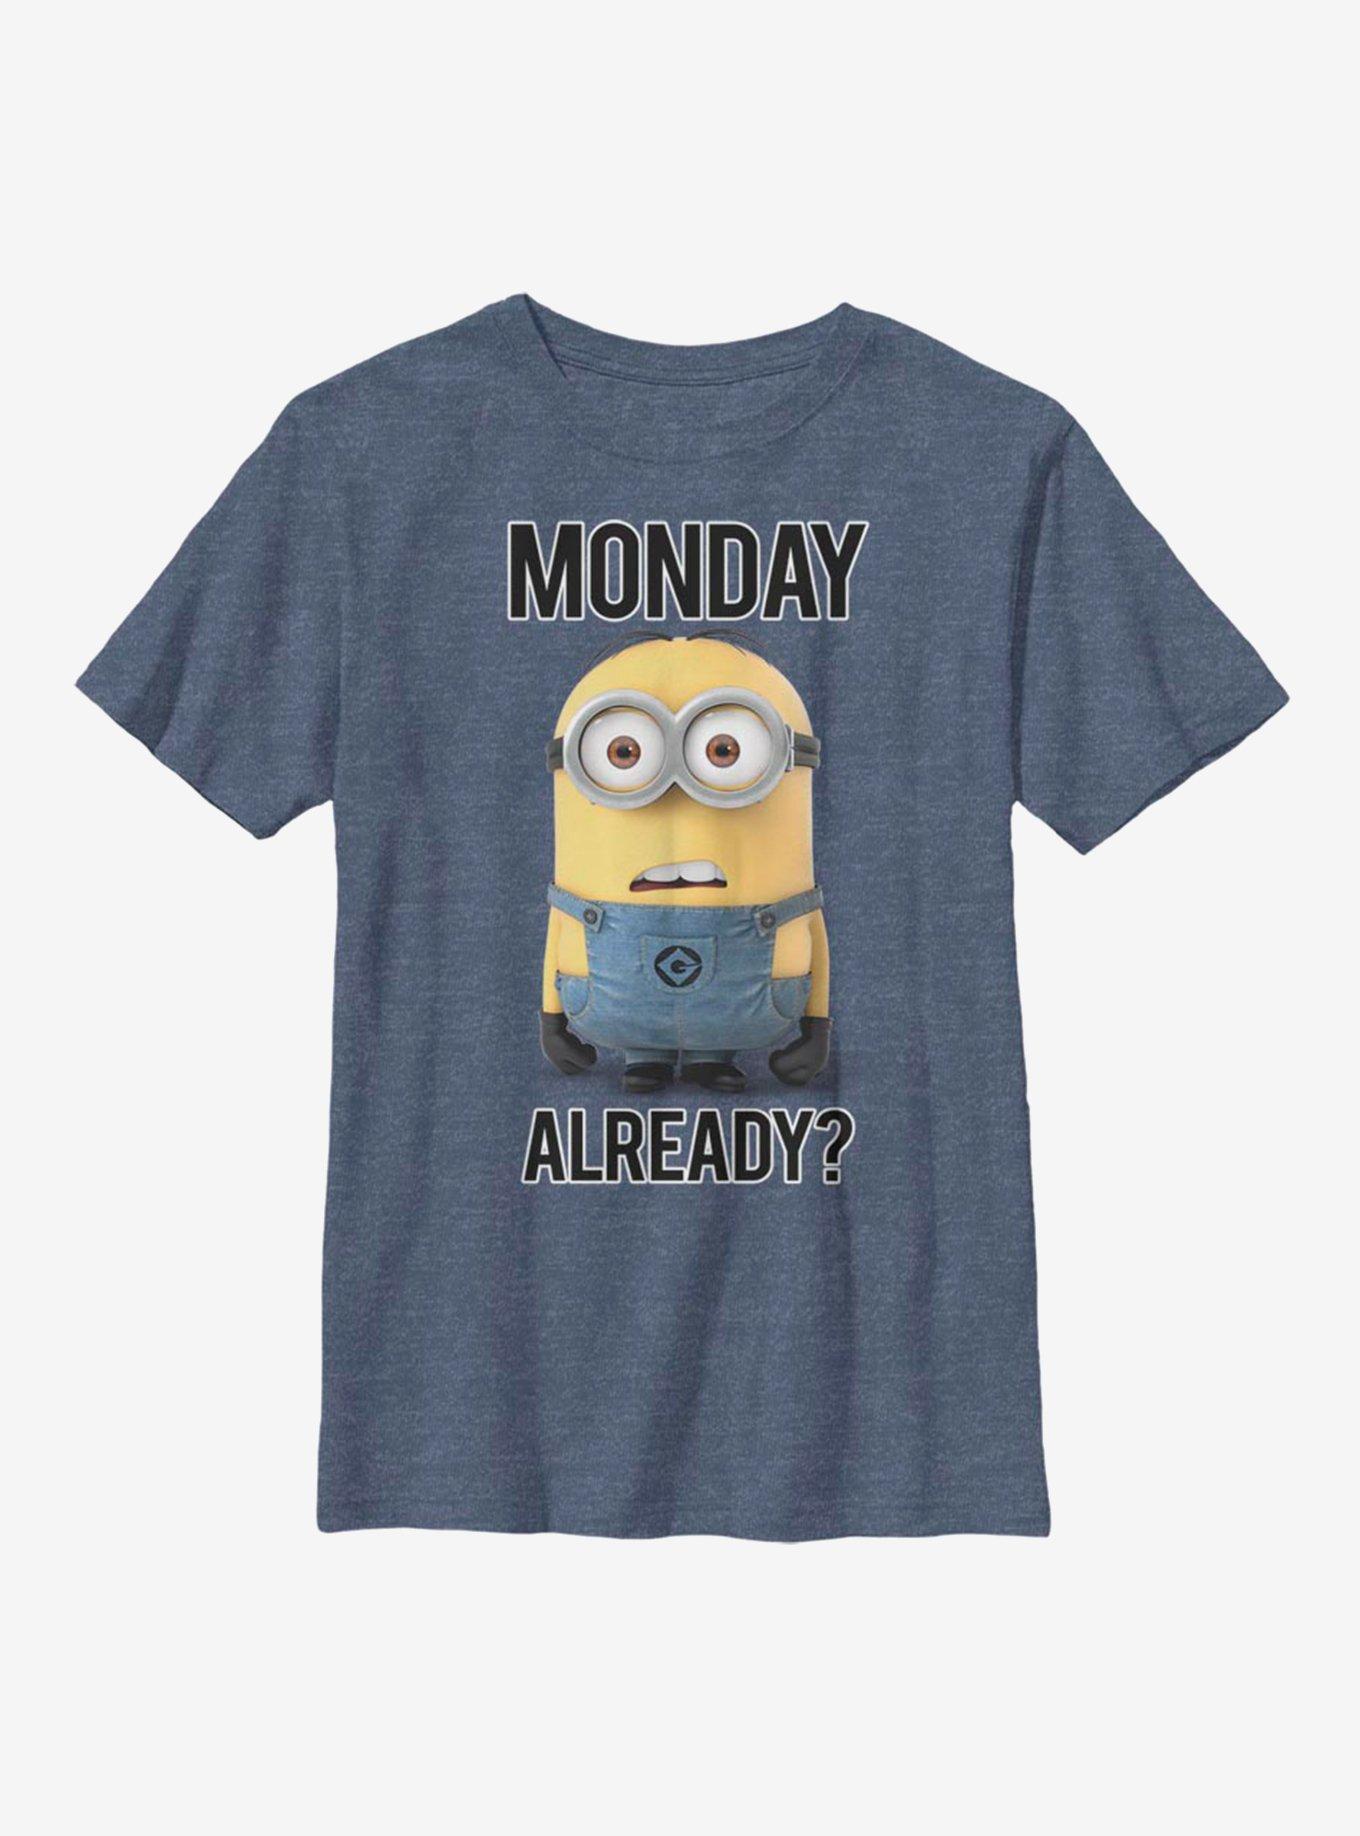 Despicable Me Minions Break Over Youth T-Shirt, NAVY HTR, hi-res